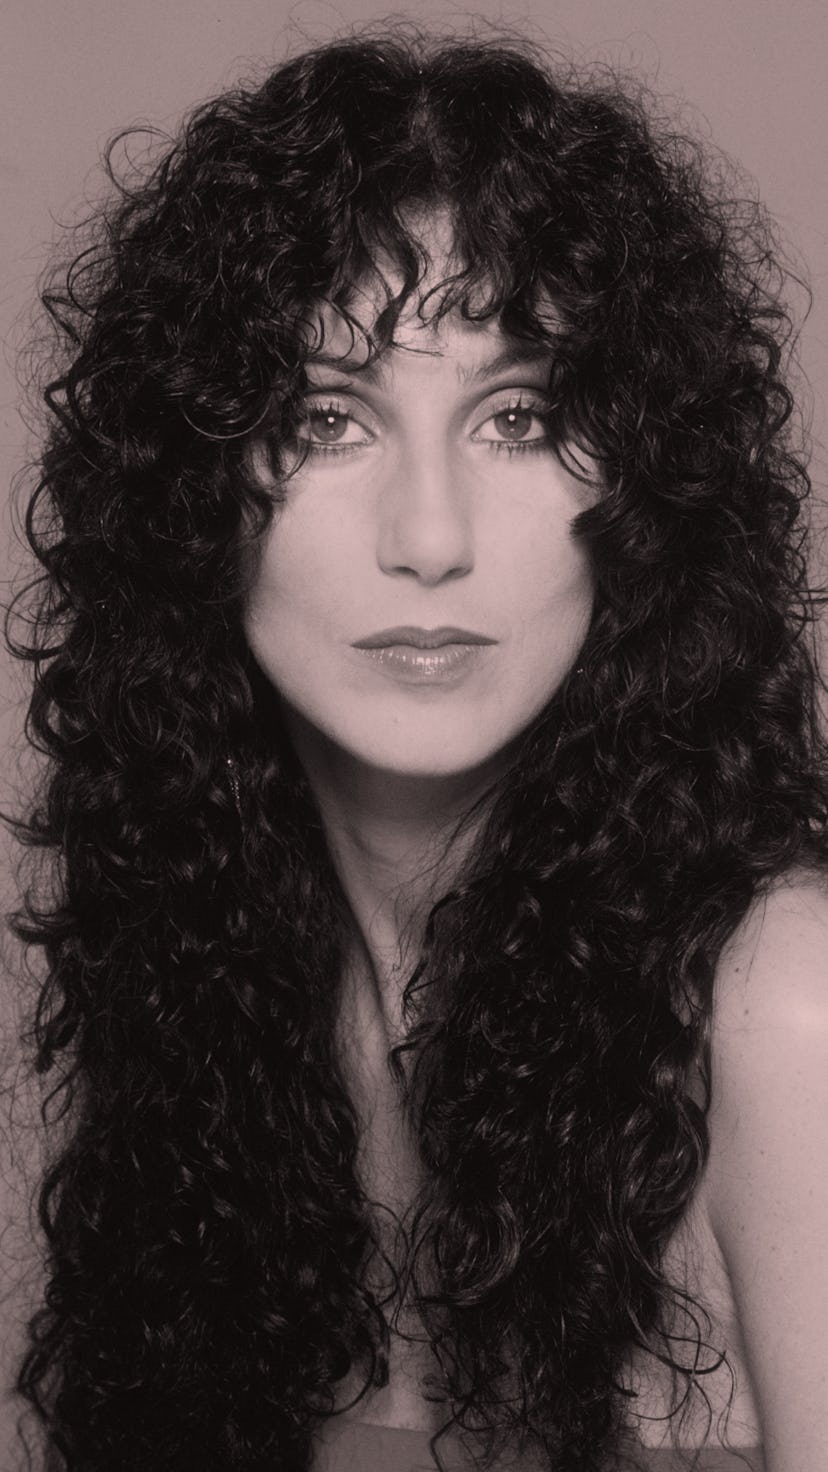 Cher with long curly hair.